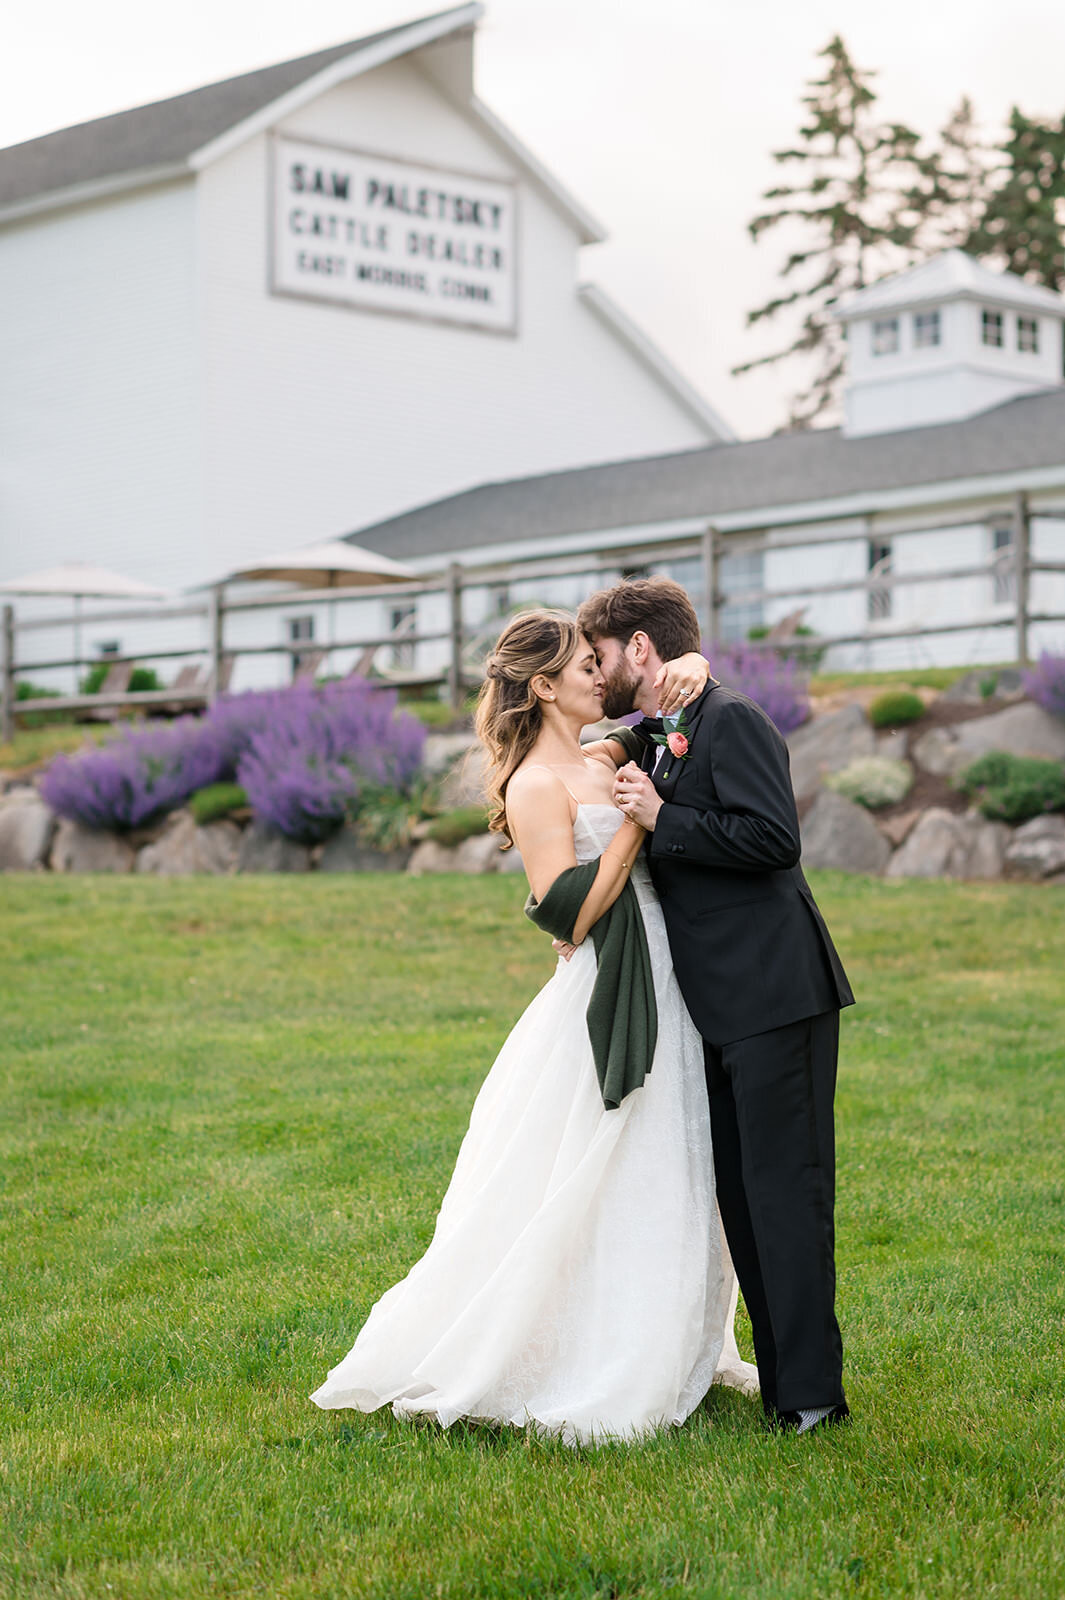 A bride and groom sharing a kiss on a lawn in front of a building with a sign that reads "Sam Paley, Cattle Dealer."